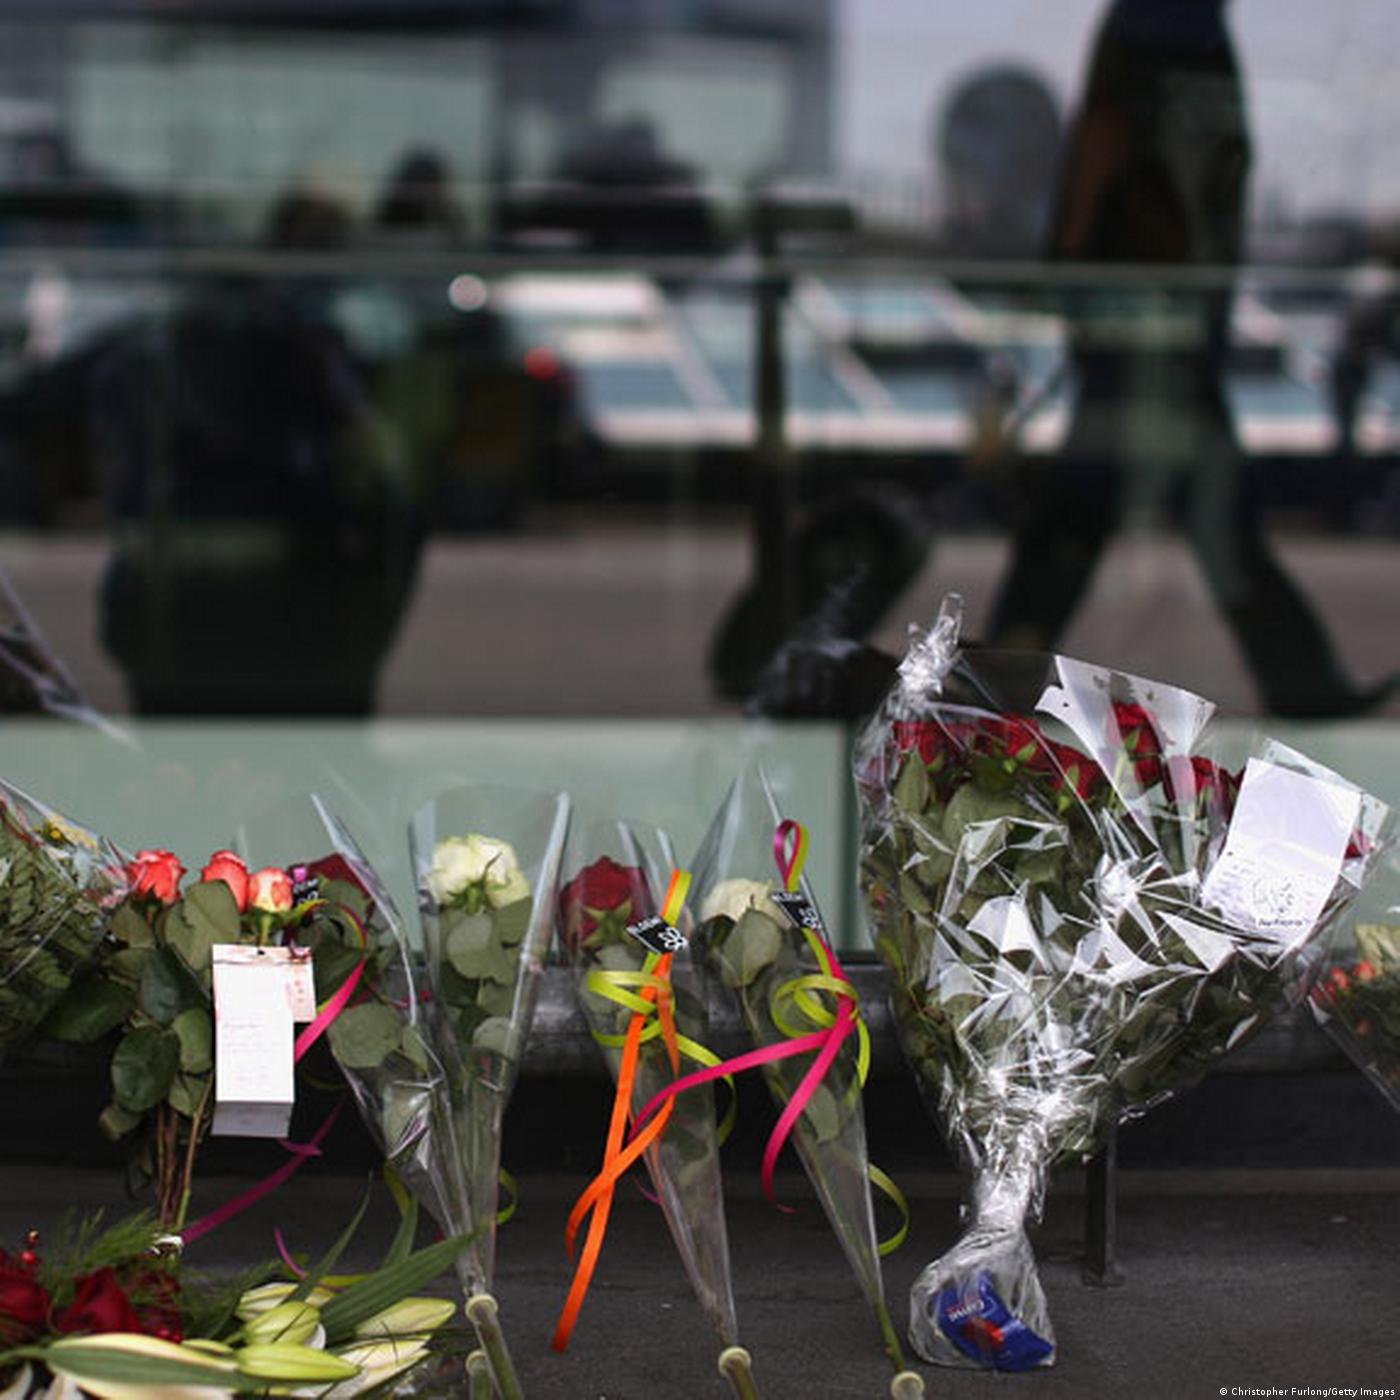 The Netherlands: When grief turns to anger